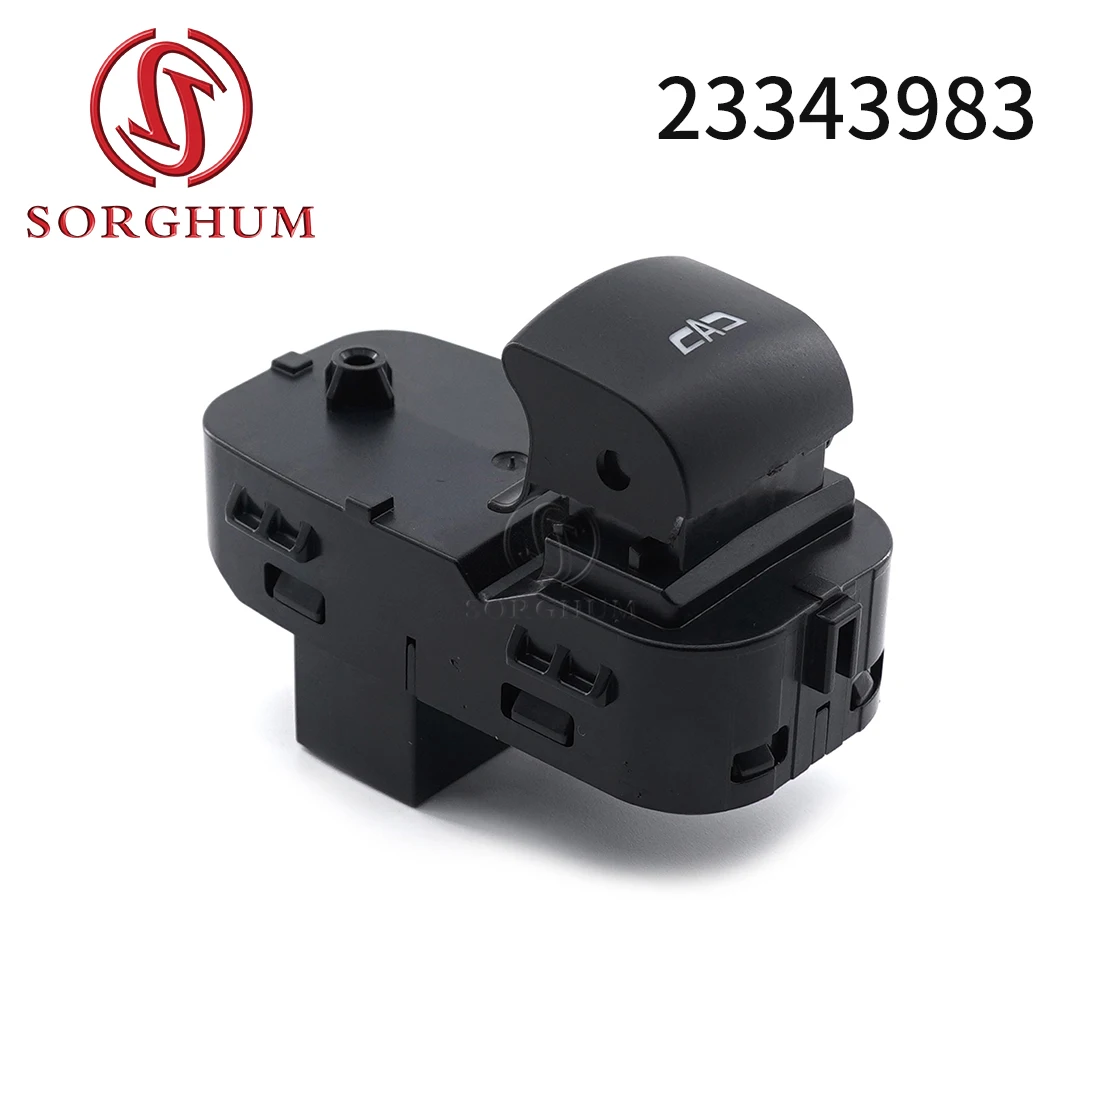 

SORGHUM 23343983 For Cadillac CTS 2020 General Motors Electric Power Window Lifter Control Switch Button 23333505 Car Accessory